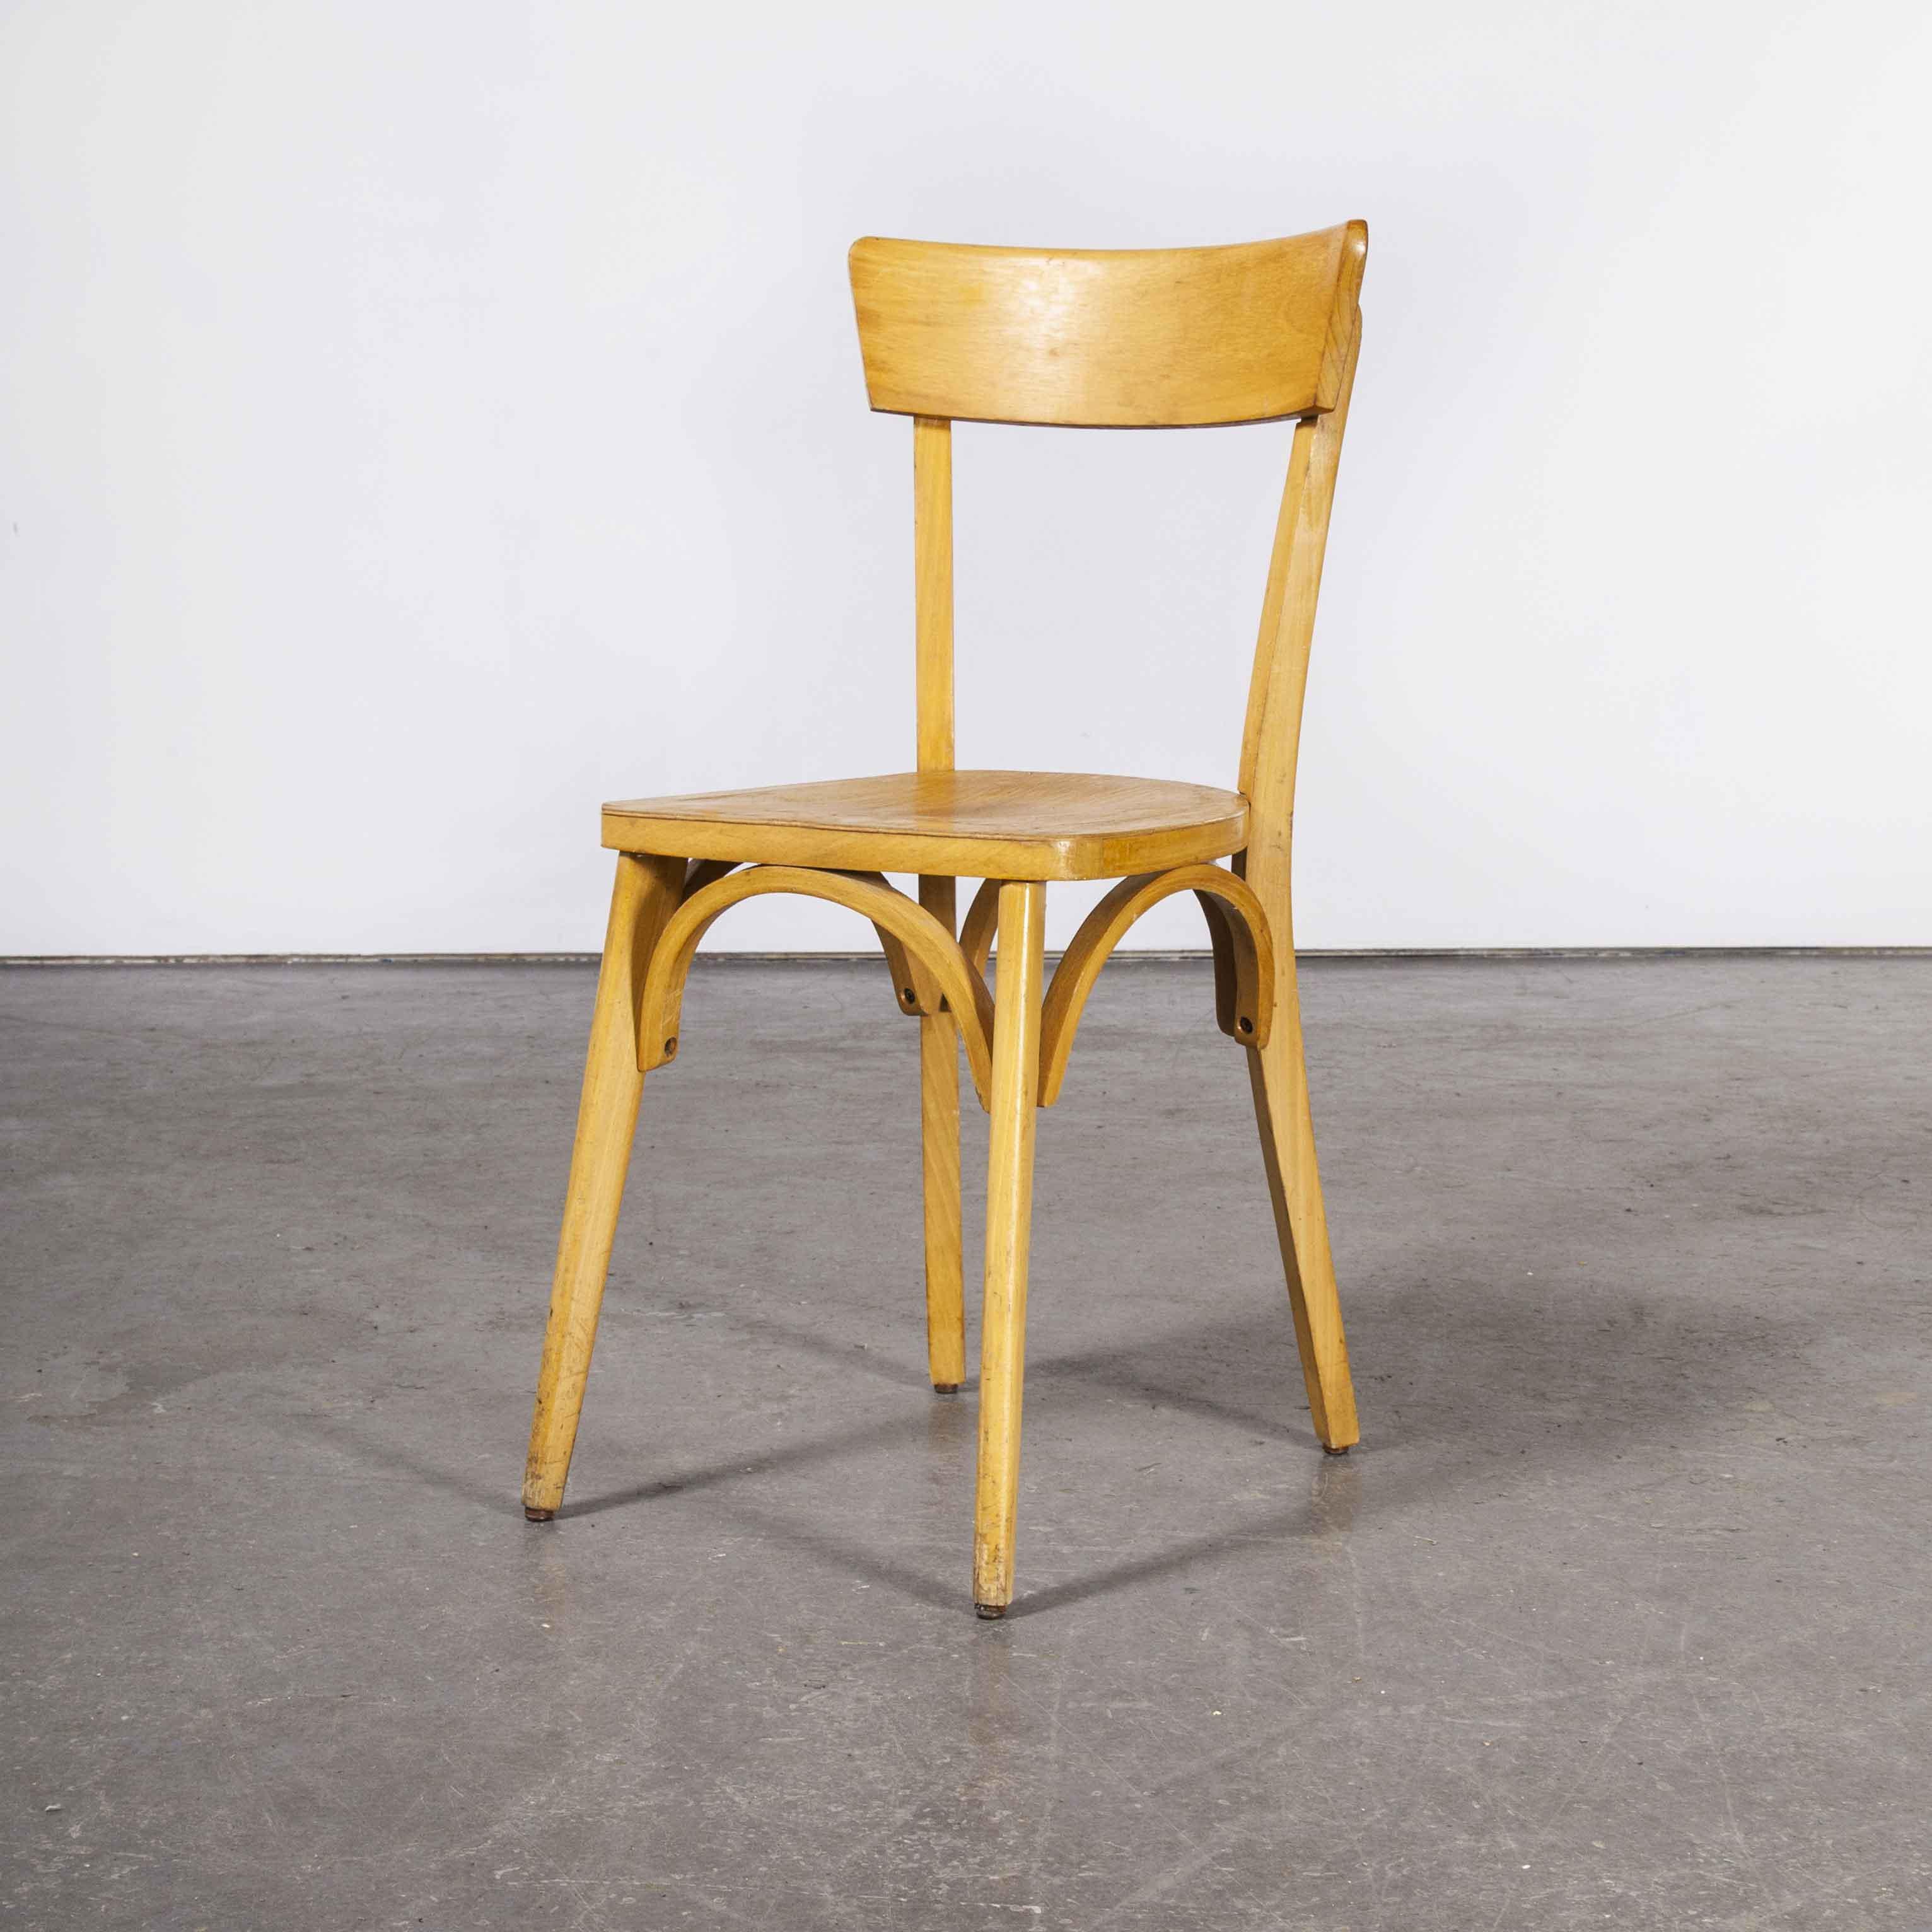 1950's French made luterma bentwood dining chairs - set of twelve (Model OB). The process of steam bending beech to create elegant chairs was discovered and developed by Thonet, but when its patents expired in 1869 many companies including Luterma